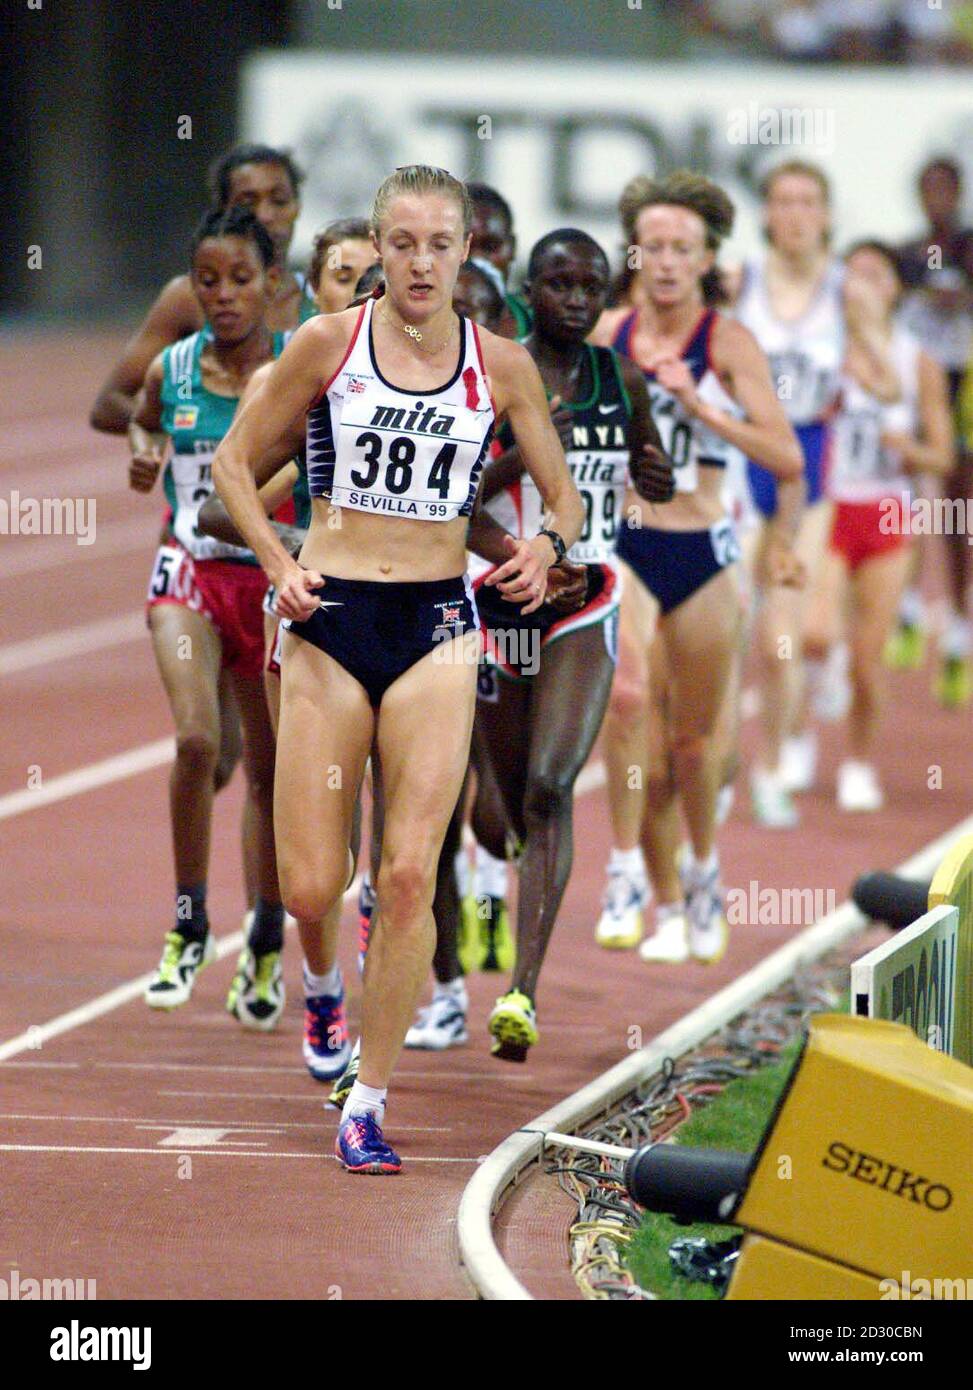 Britain's Paula Radcliffe leads the 10,000m  at the 5,000 point.  Paula eventually finished second at the IAAF World Athletics Championships in Seville, Spain, creating a new British and Commonwealth record. Stock Photo